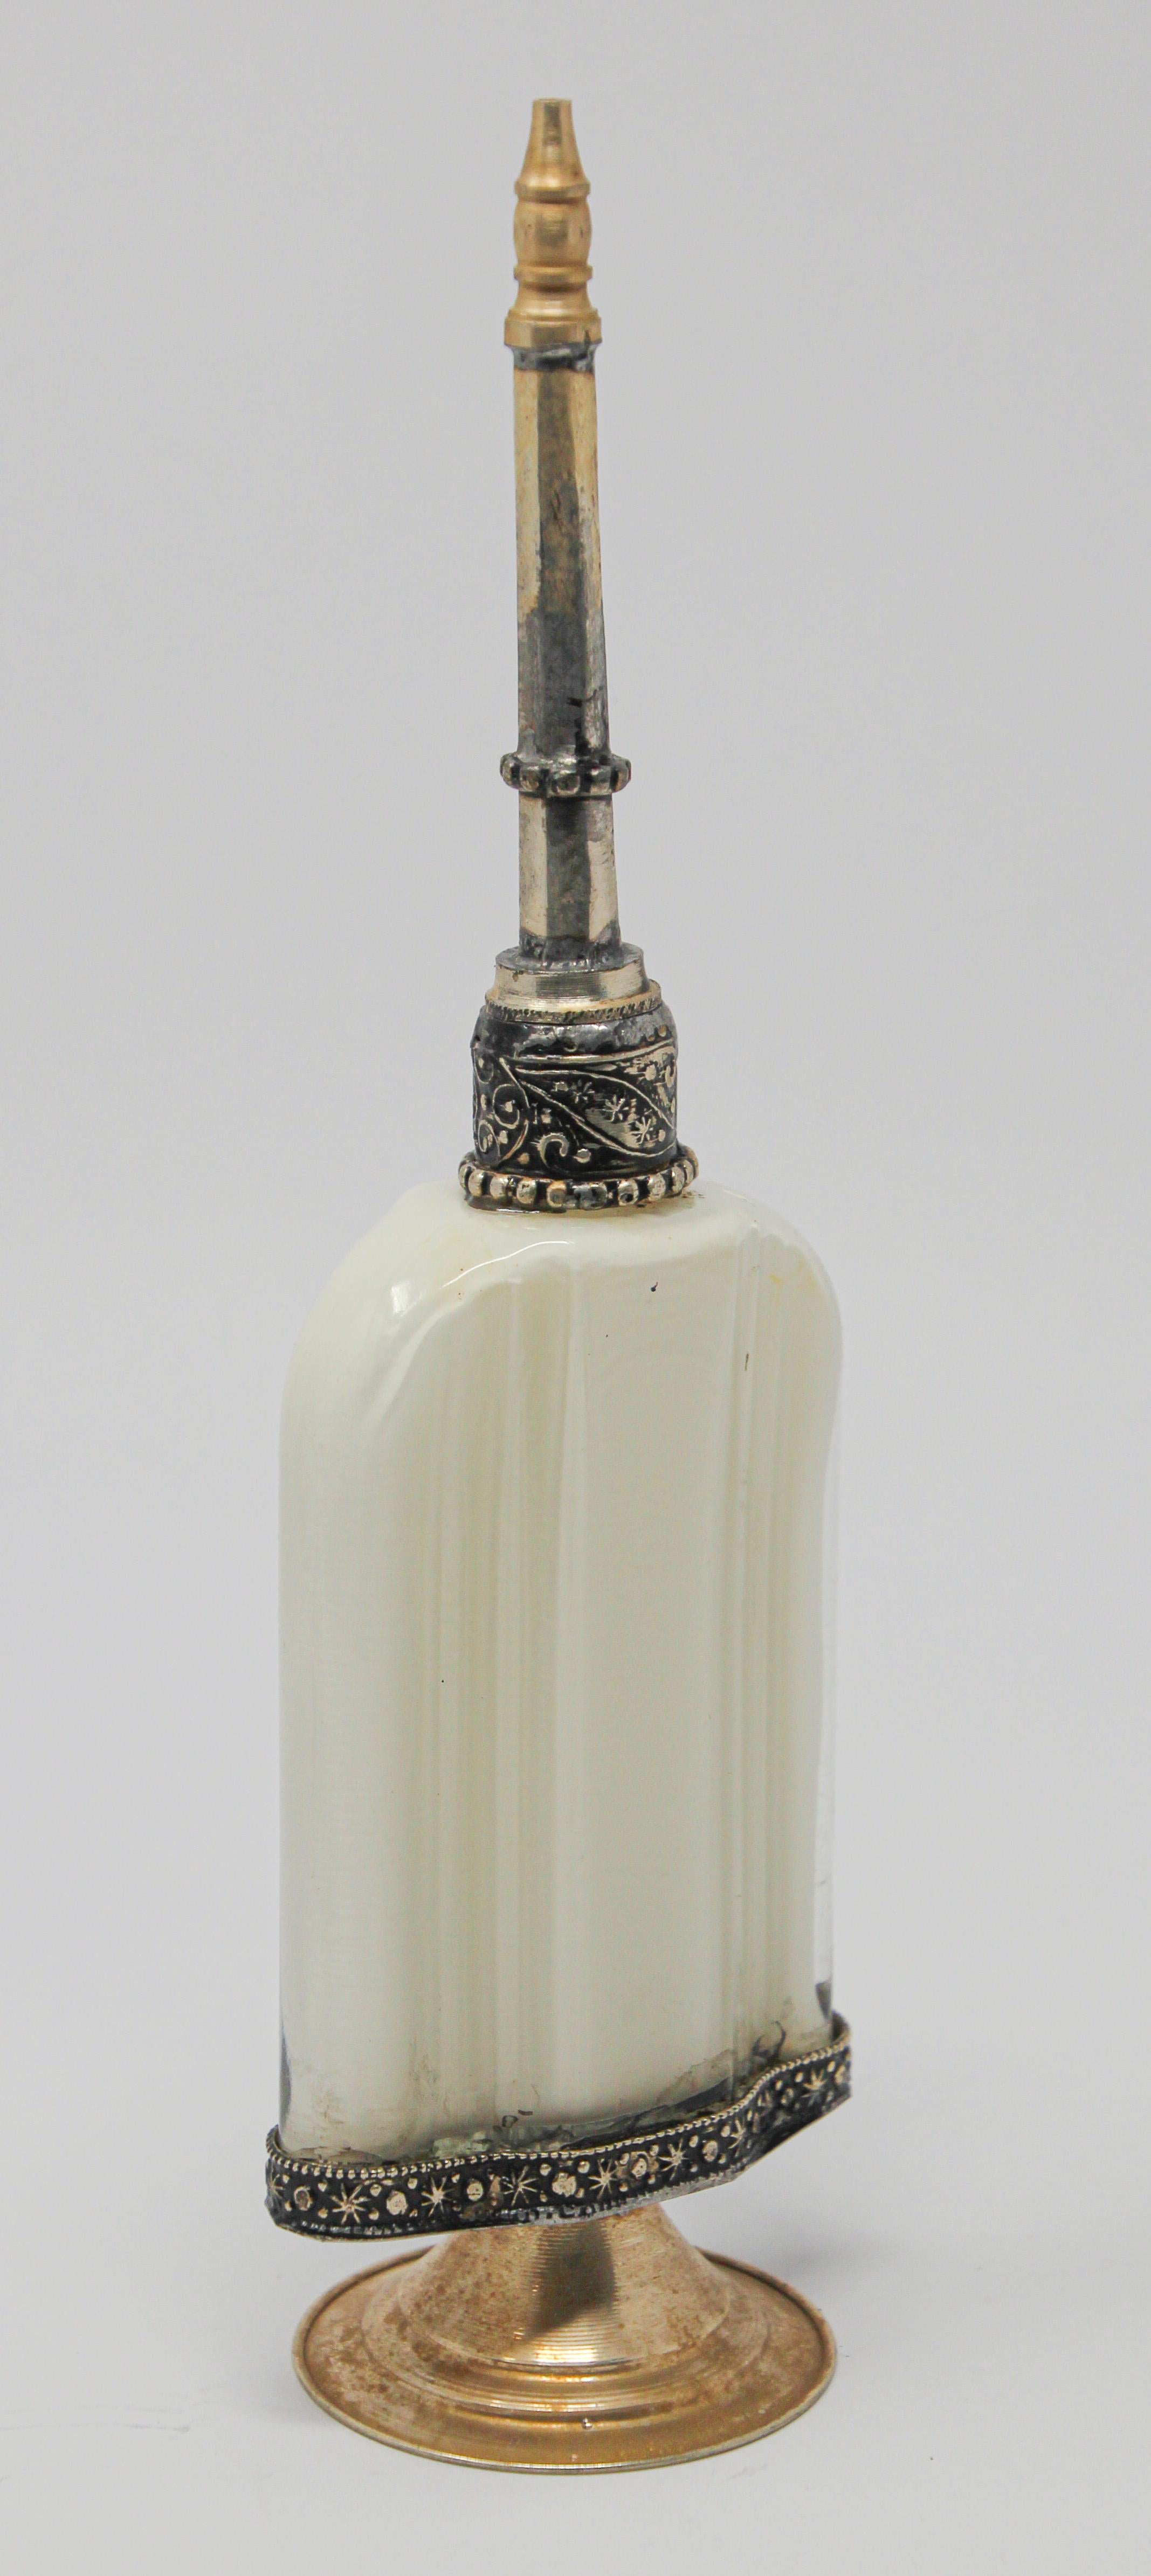 Handcrafted Moroccan Moorish white glass perfume footed bottle or rose water sprinkler with raised embossed silvered metal floral design over glass.
The pressed glass bottle in Art Deco, Art Nouveau style is oval shape with curved sides and hand